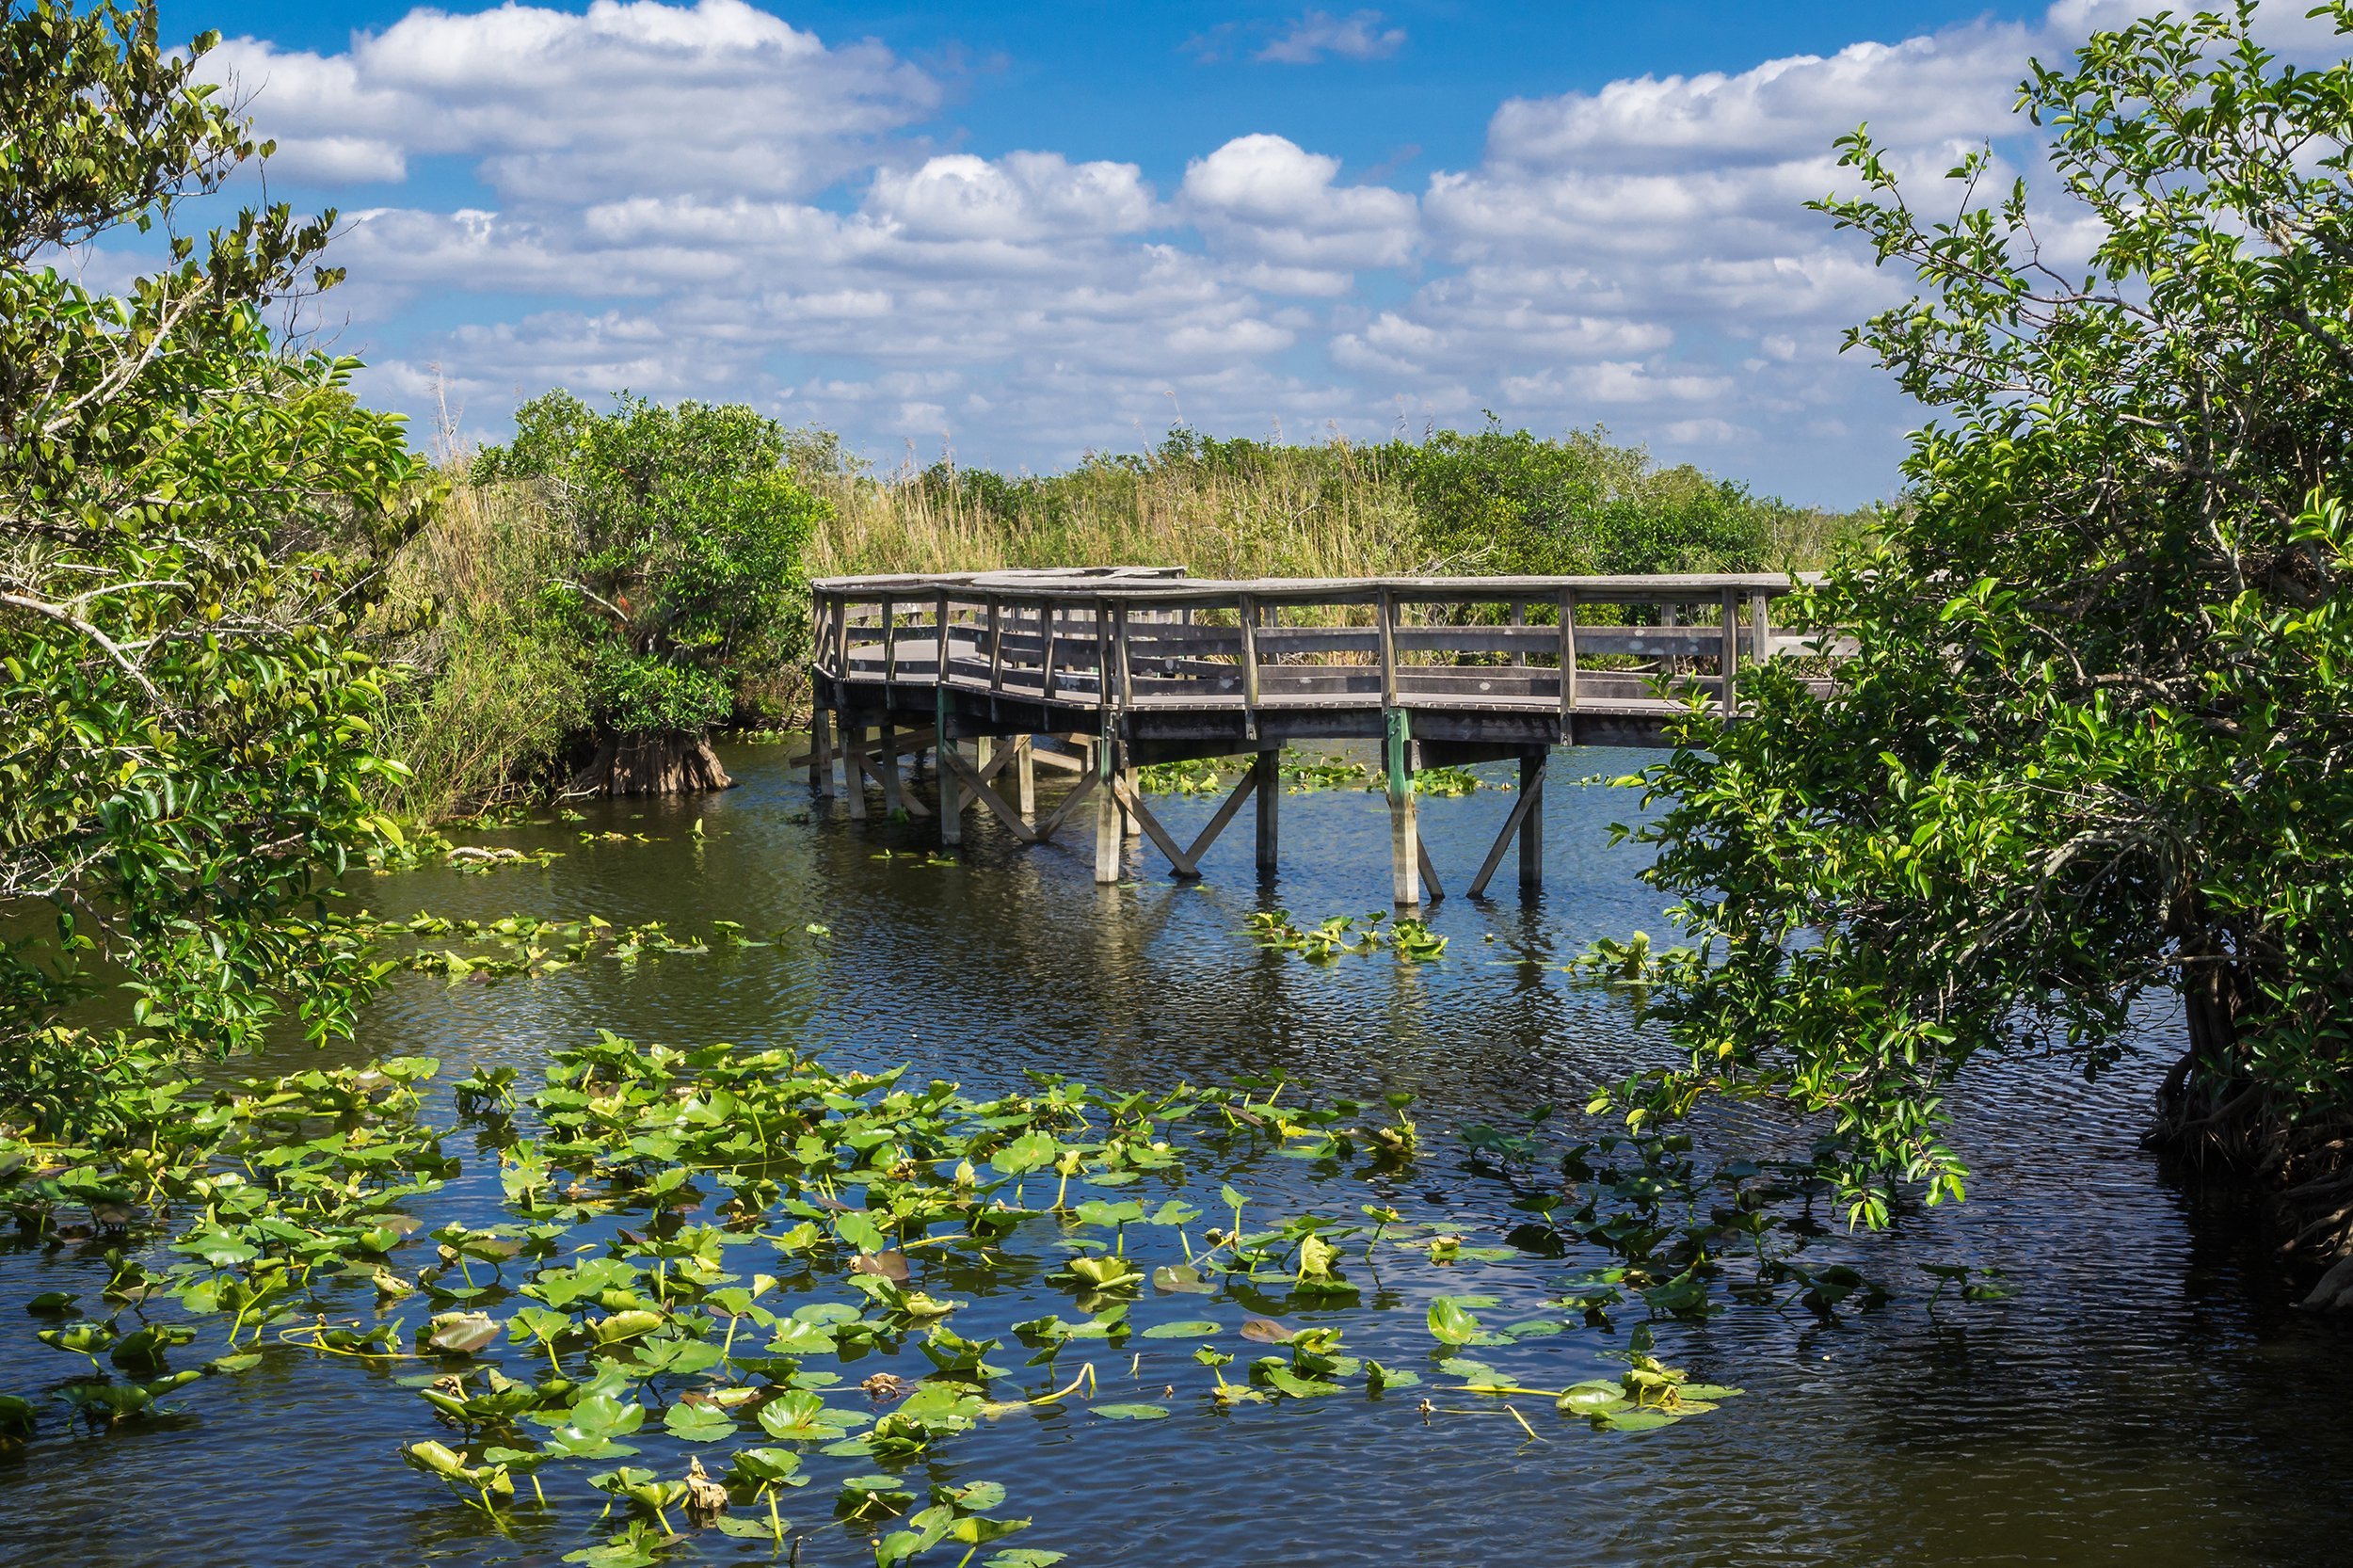 <p>The third-largest national park in the continental United States, the <a href="https://www.nps.gov/ever/index.htm">Everglades</a> are home to Florida panthers, manatees, hundreds of different types of birds and fish, and, of course, alligators. Many areas of the park are accessible only by boat. Visitors can bring their own, rent one, or take a boat tour. </p><p><b>Related:</b> <a href="https://blog.cheapism.com/winter-national-park-trips/">Best National Parks to Visit in Winter</a></p>